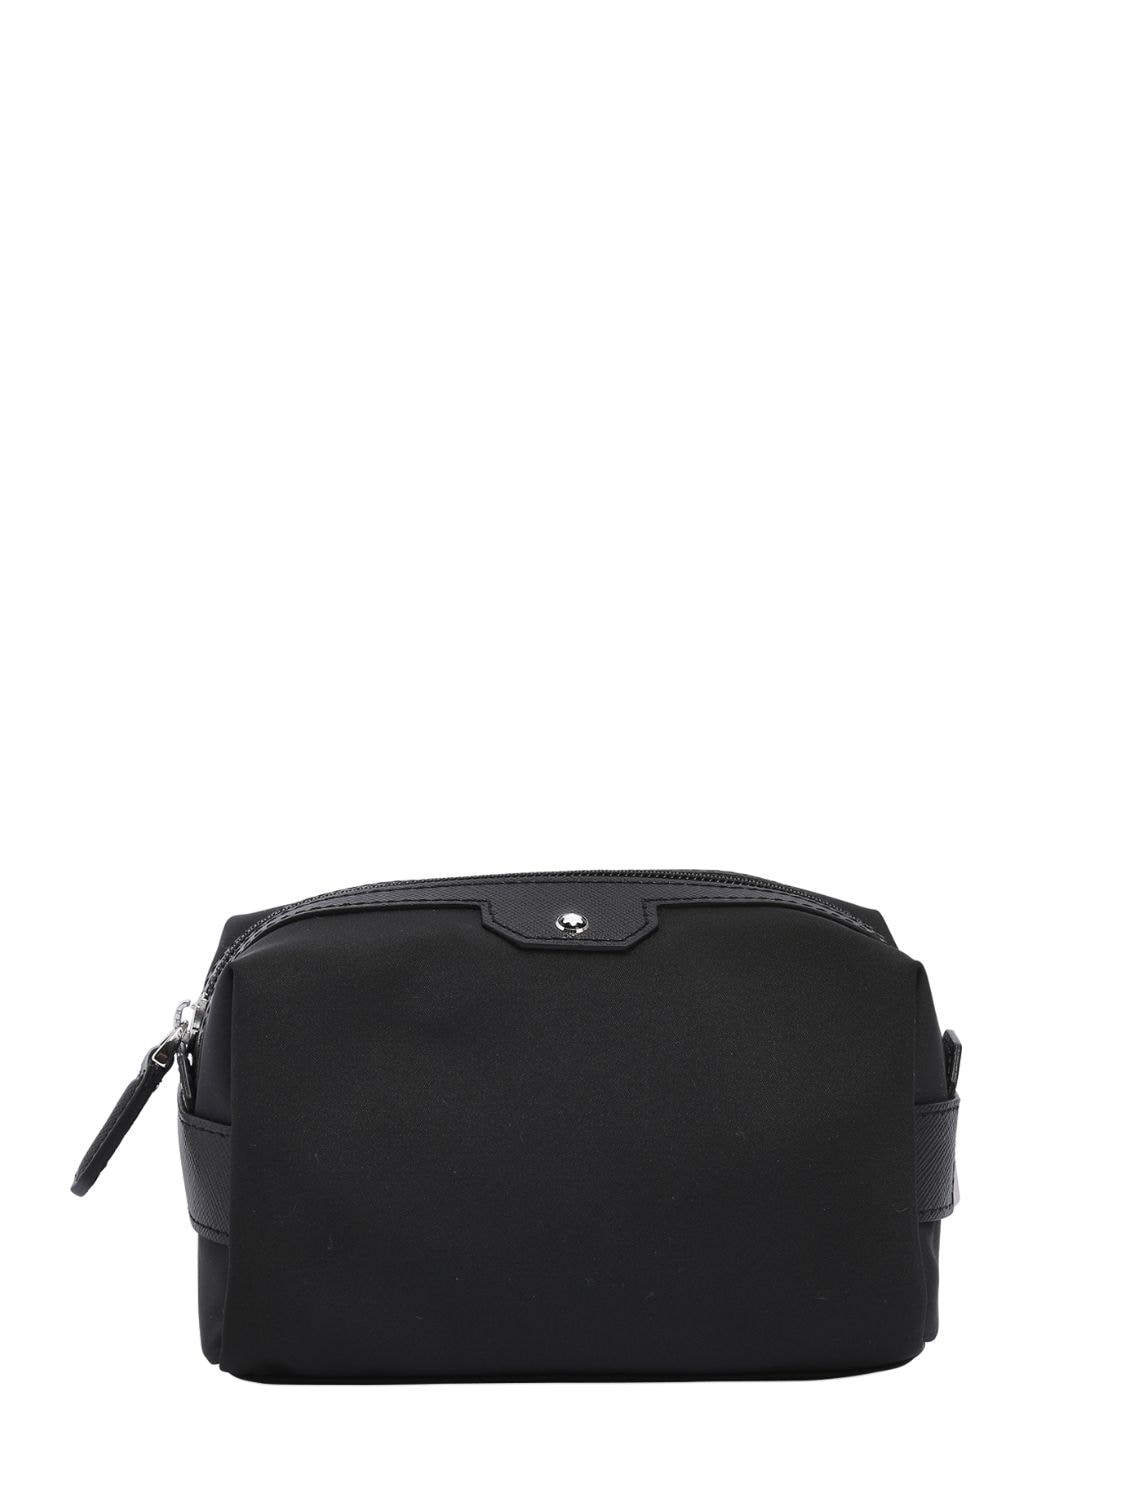 Montblanc Small Sartorial Jet Pouch In Black